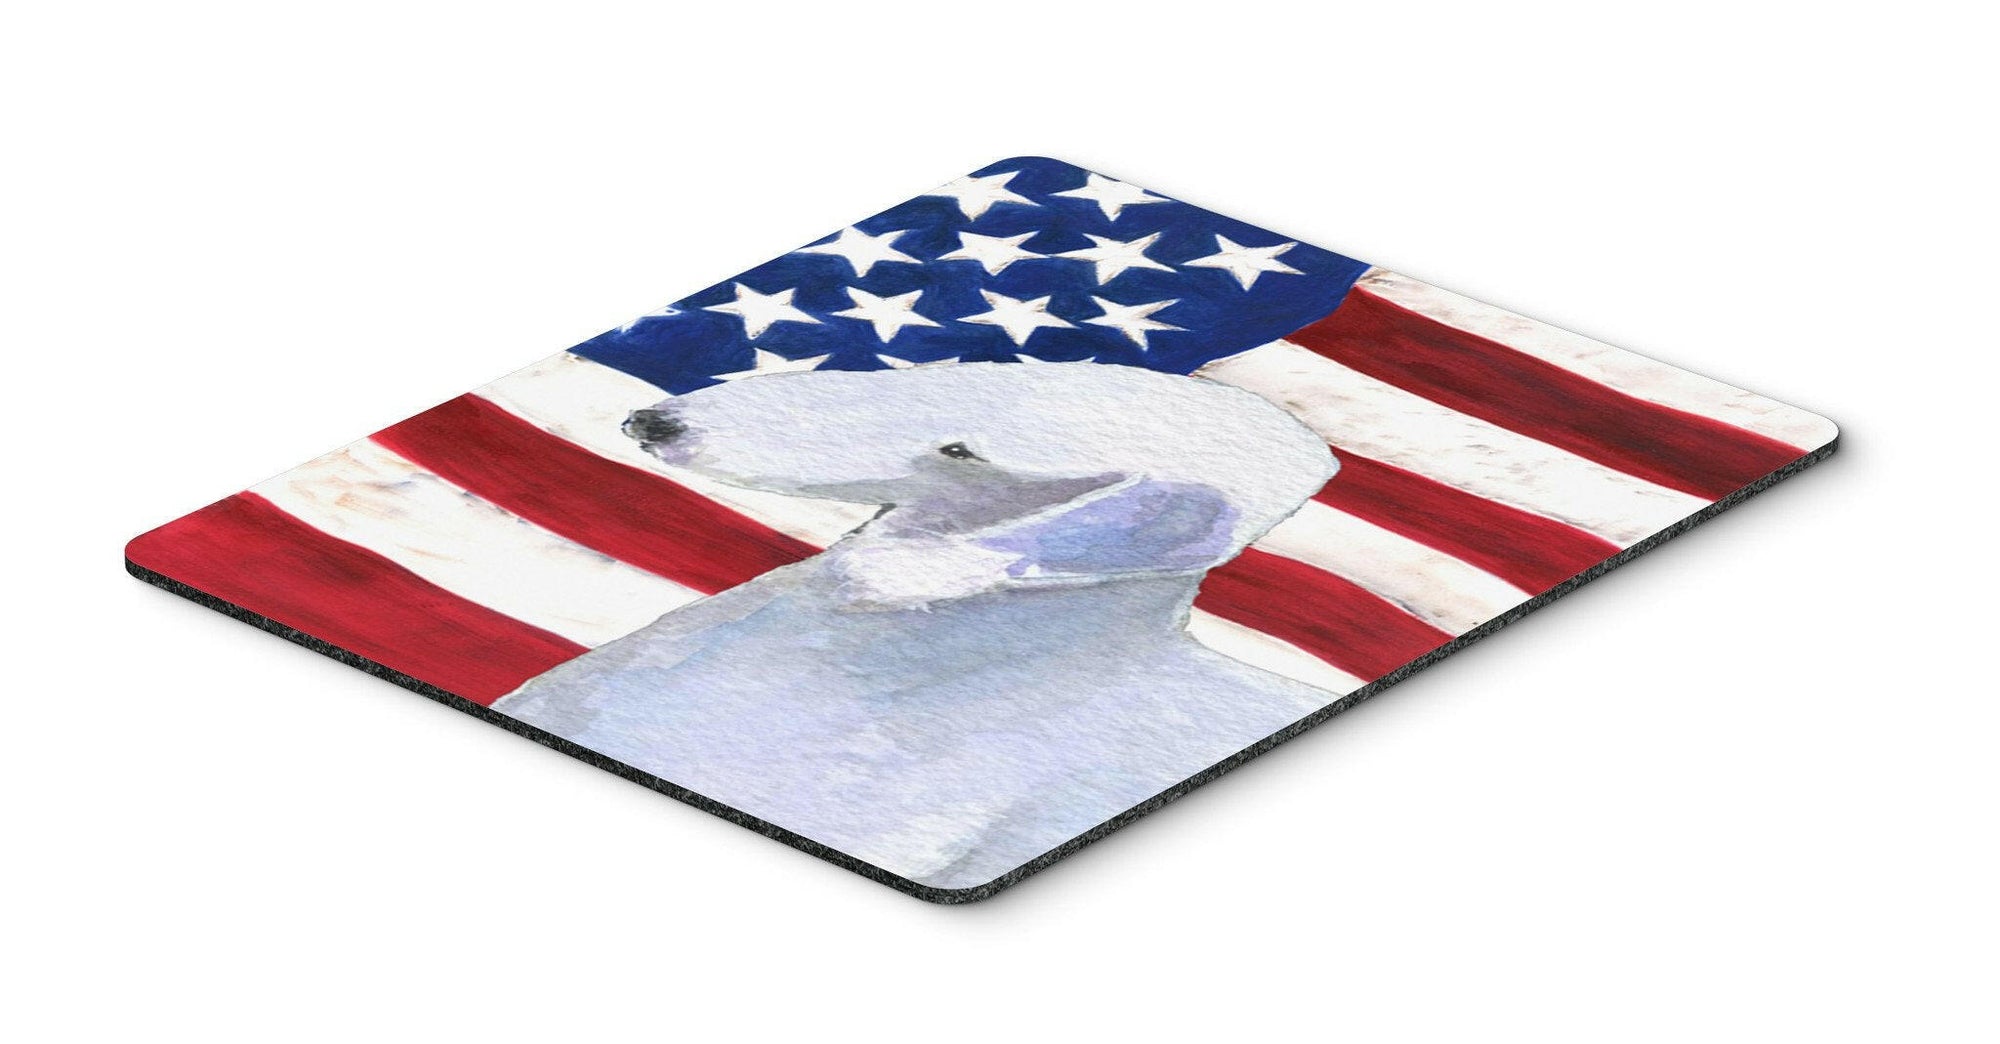 USA American Flag with Bedlington Terrier Mouse Pad, Hot Pad or Trivet by Caroline's Treasures